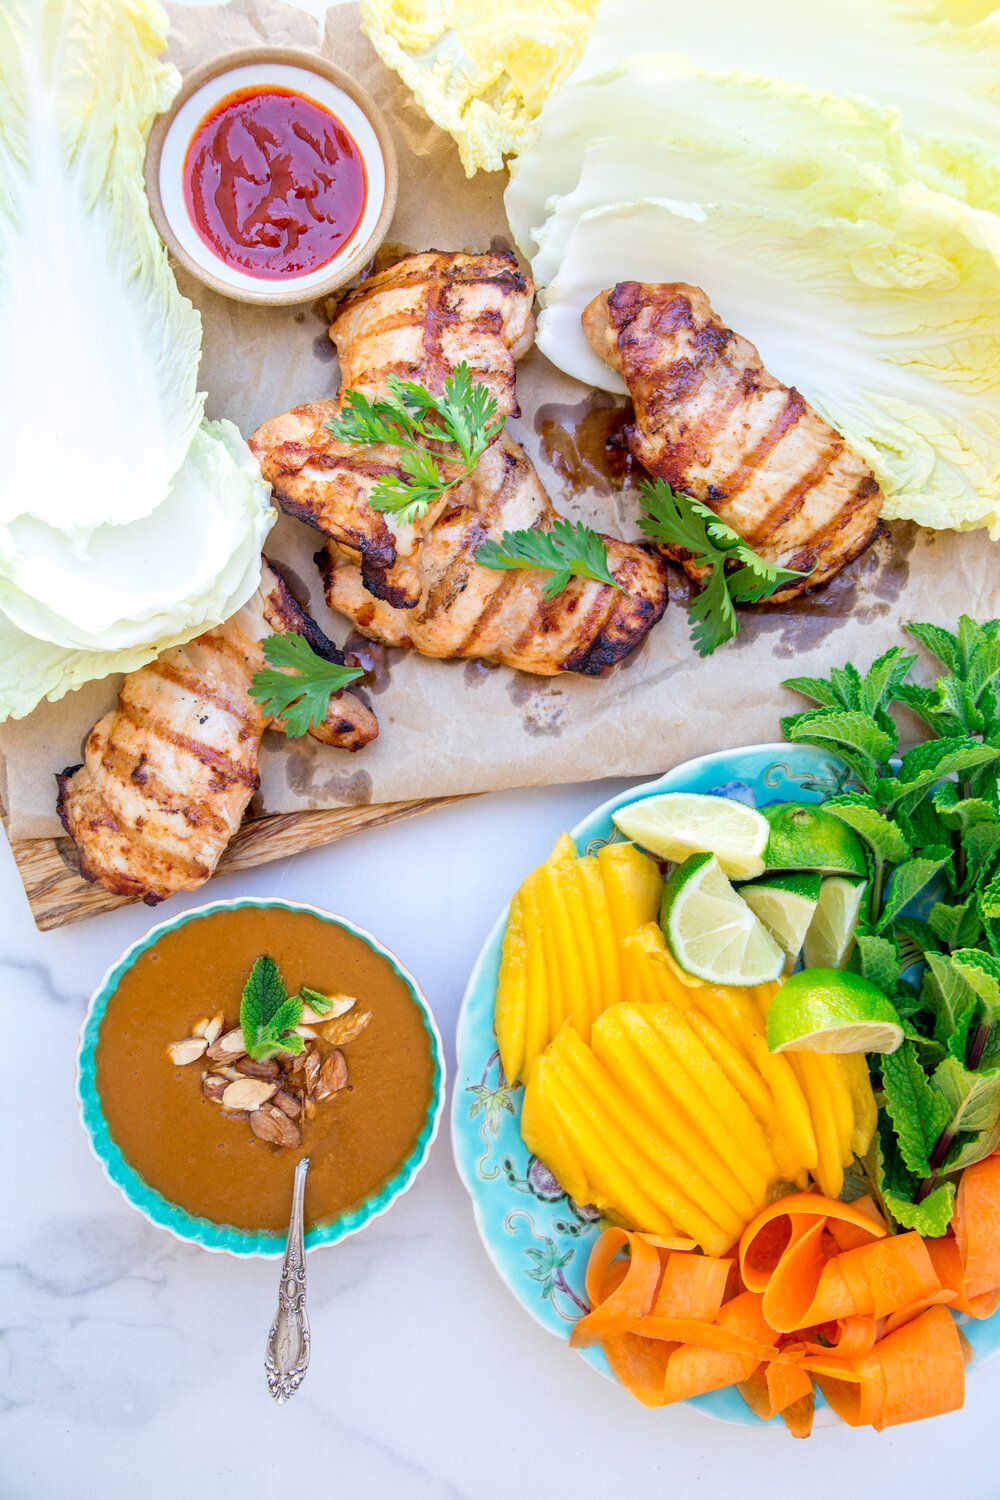 Grilled Sriracha-Soy Chicken Lettuce Wraps with Sriracha Almond Butter Sauce